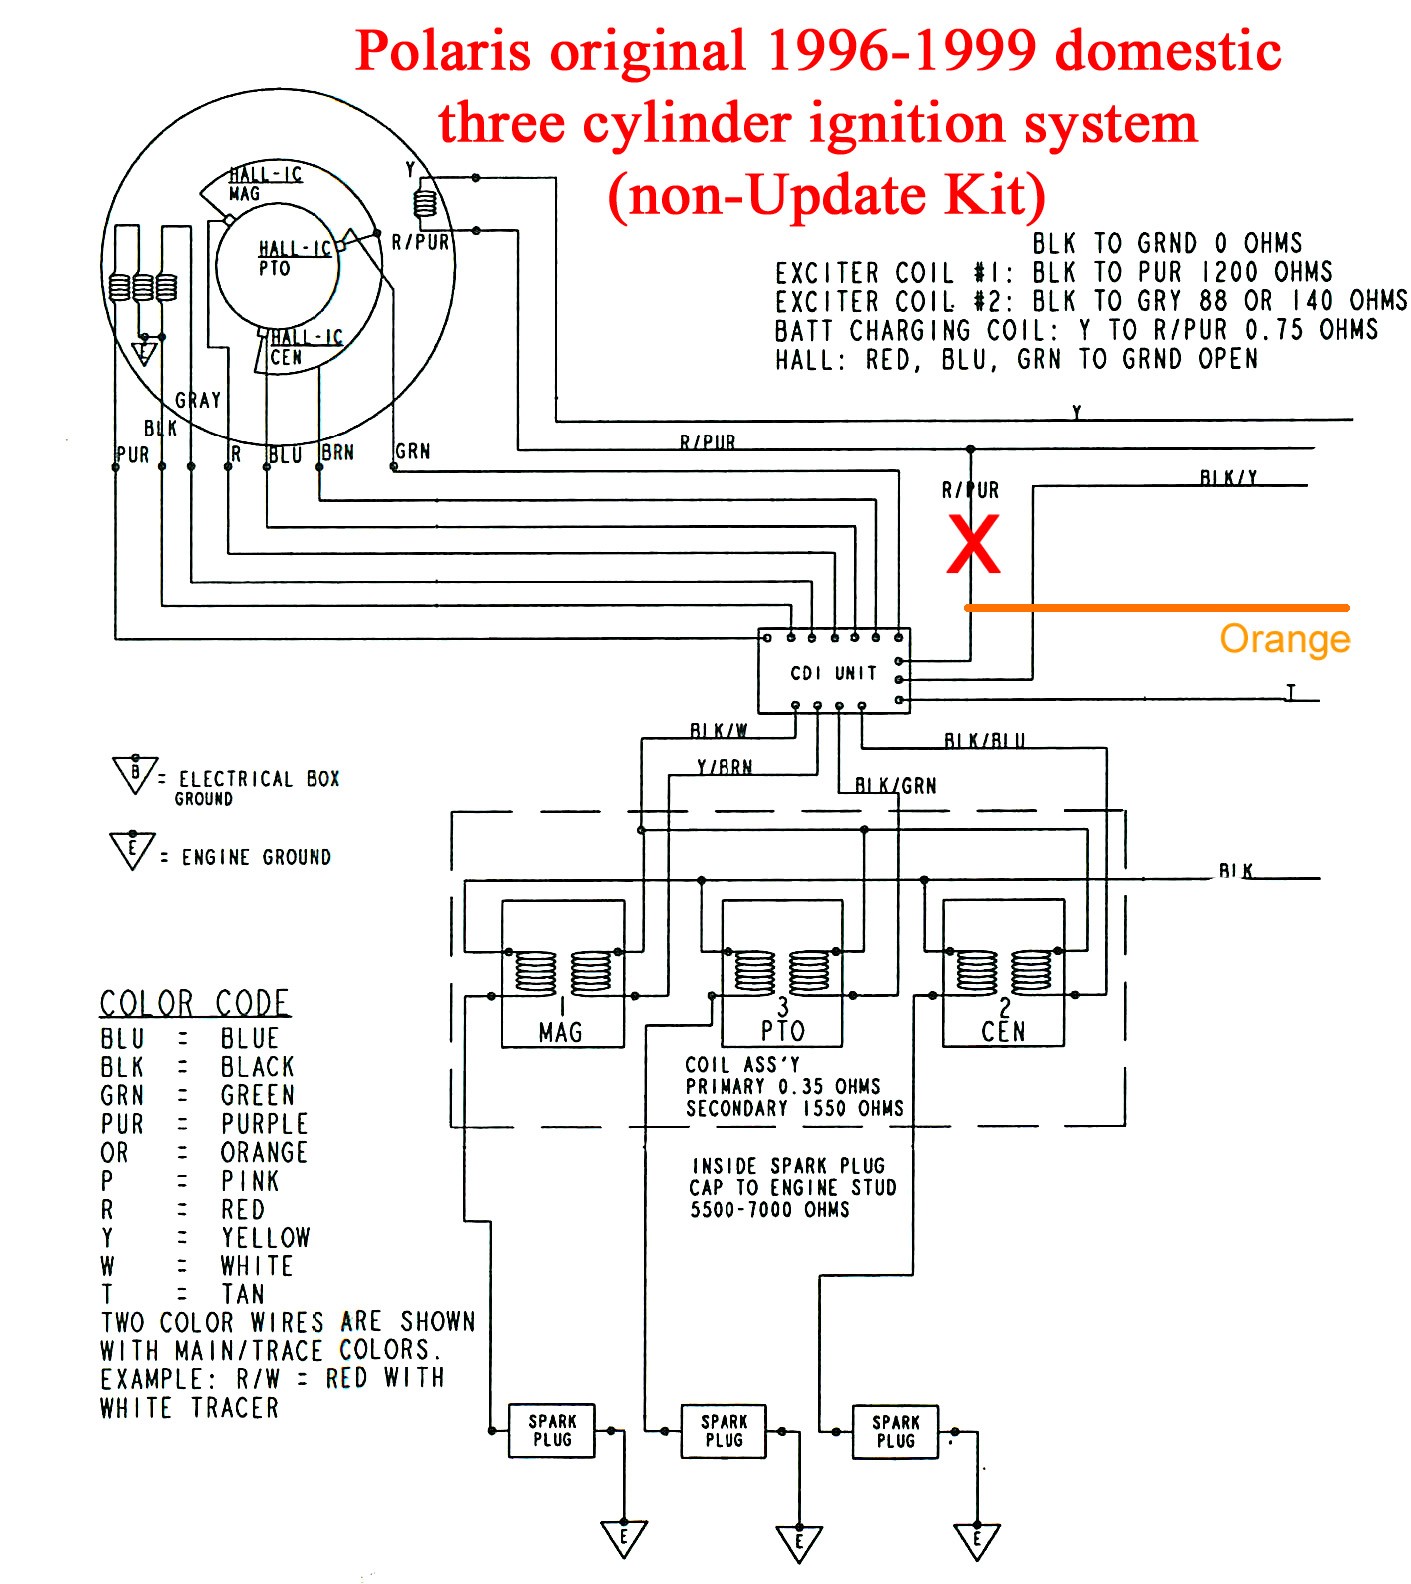 Car Ignition System Wiring Diagram Positive Ground Ignition Wiring Diagram Wiring A Motor Car